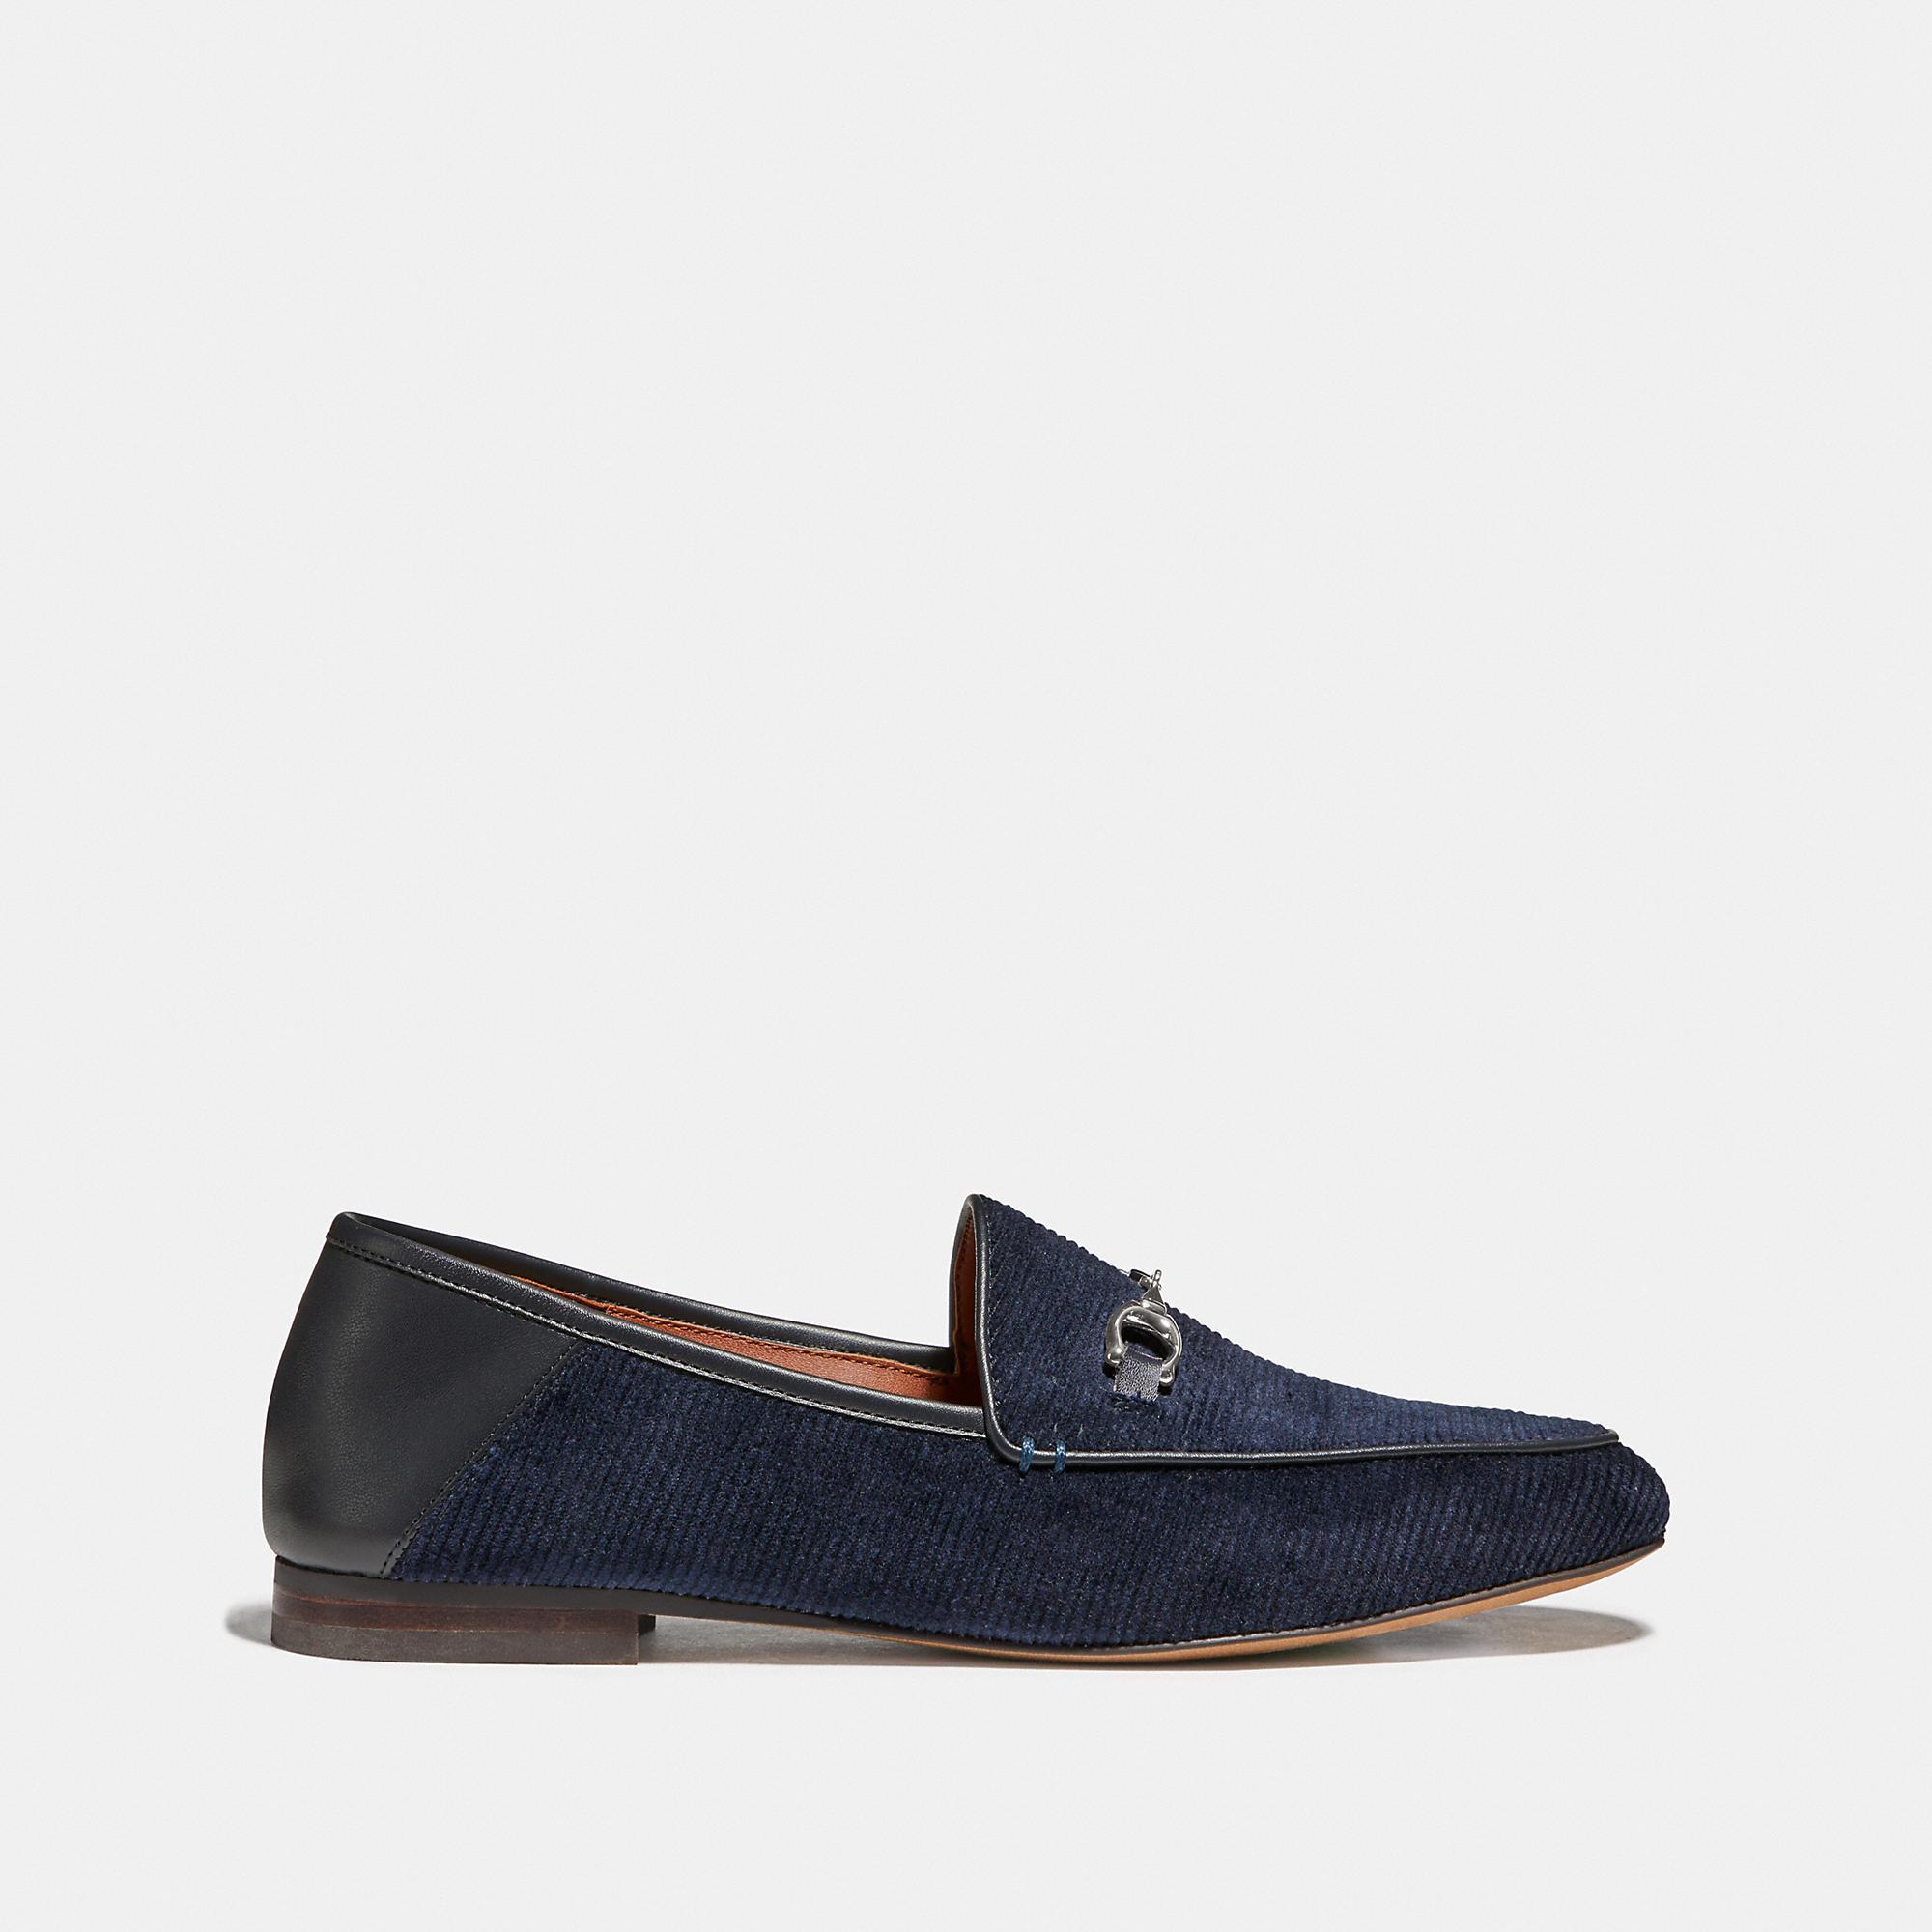 COACH Corduroy Haley Loafer in Navy (Blue) - Lyst